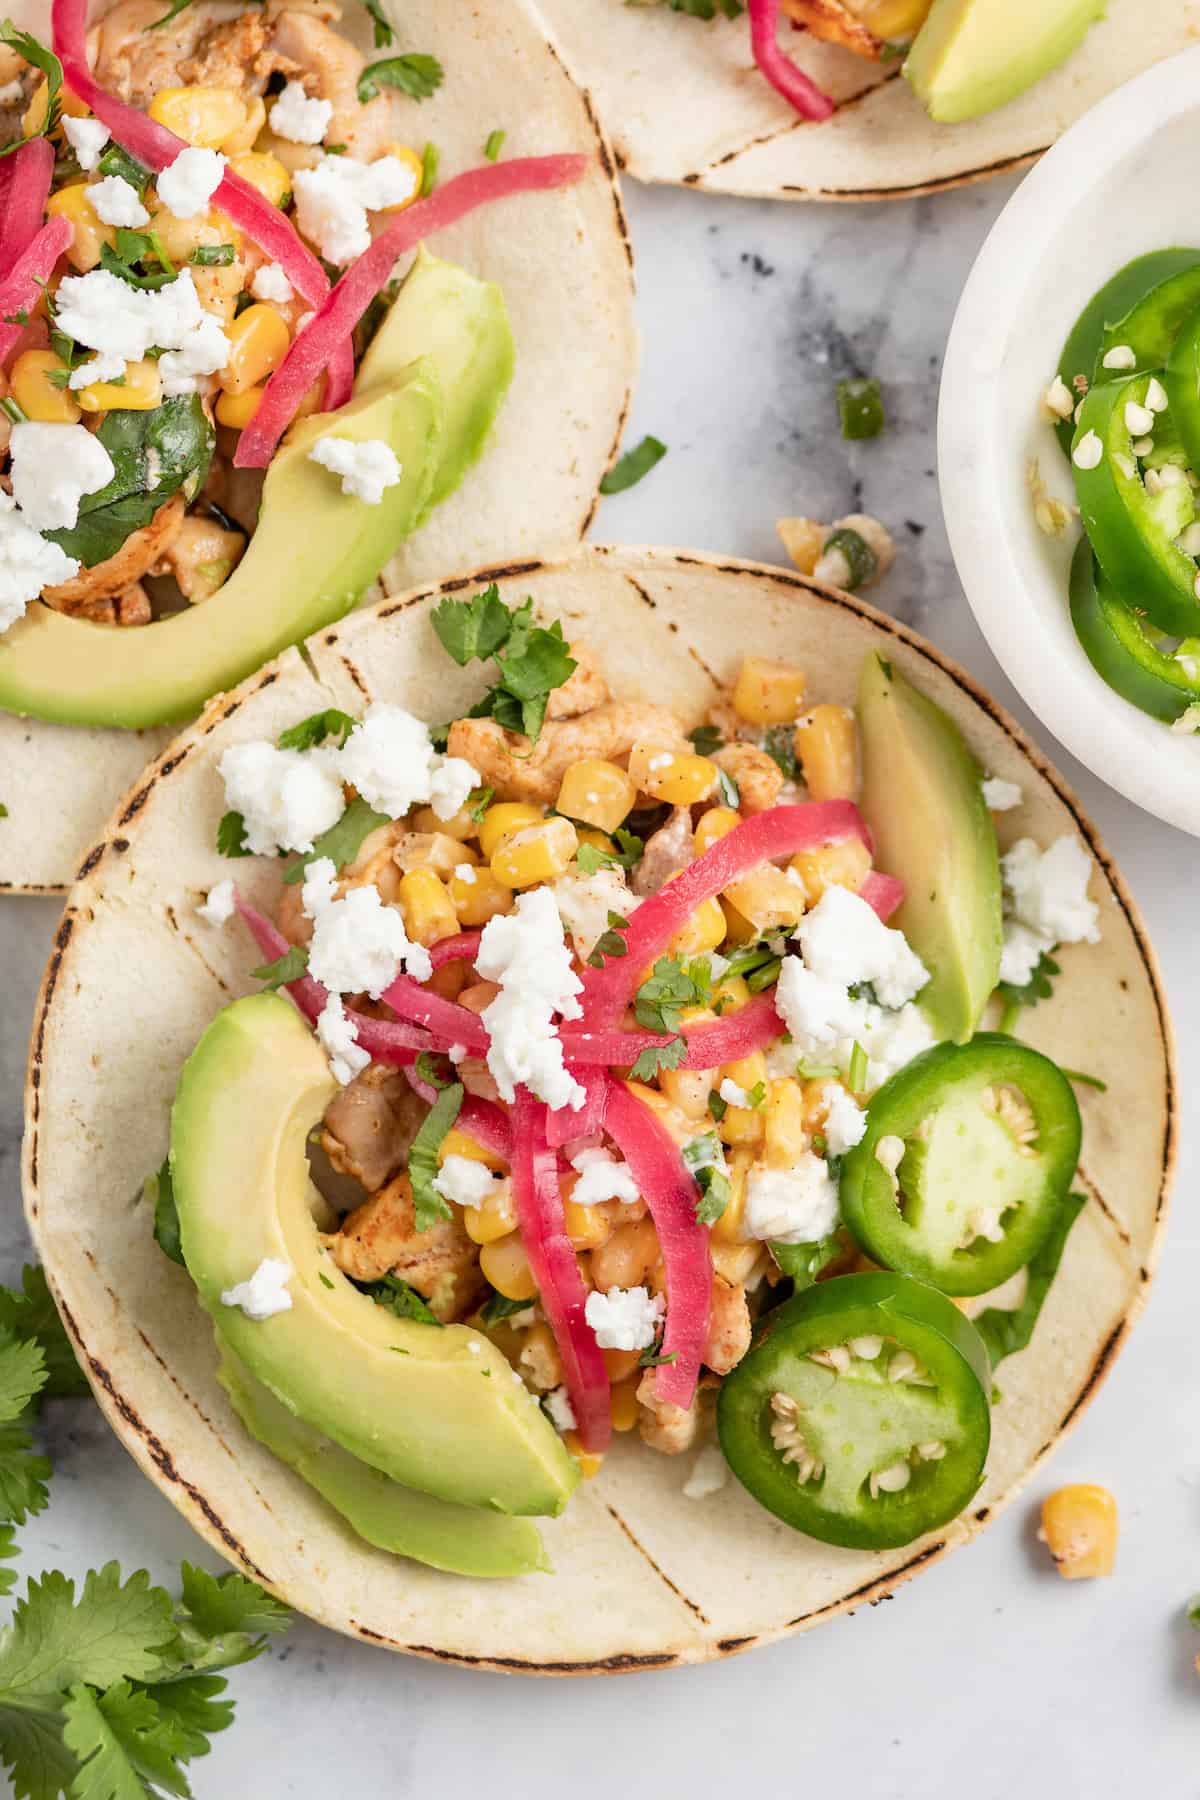 Chicken Street Tacos with pickled onions, Mexican Street Corn salad, and sliced avocados